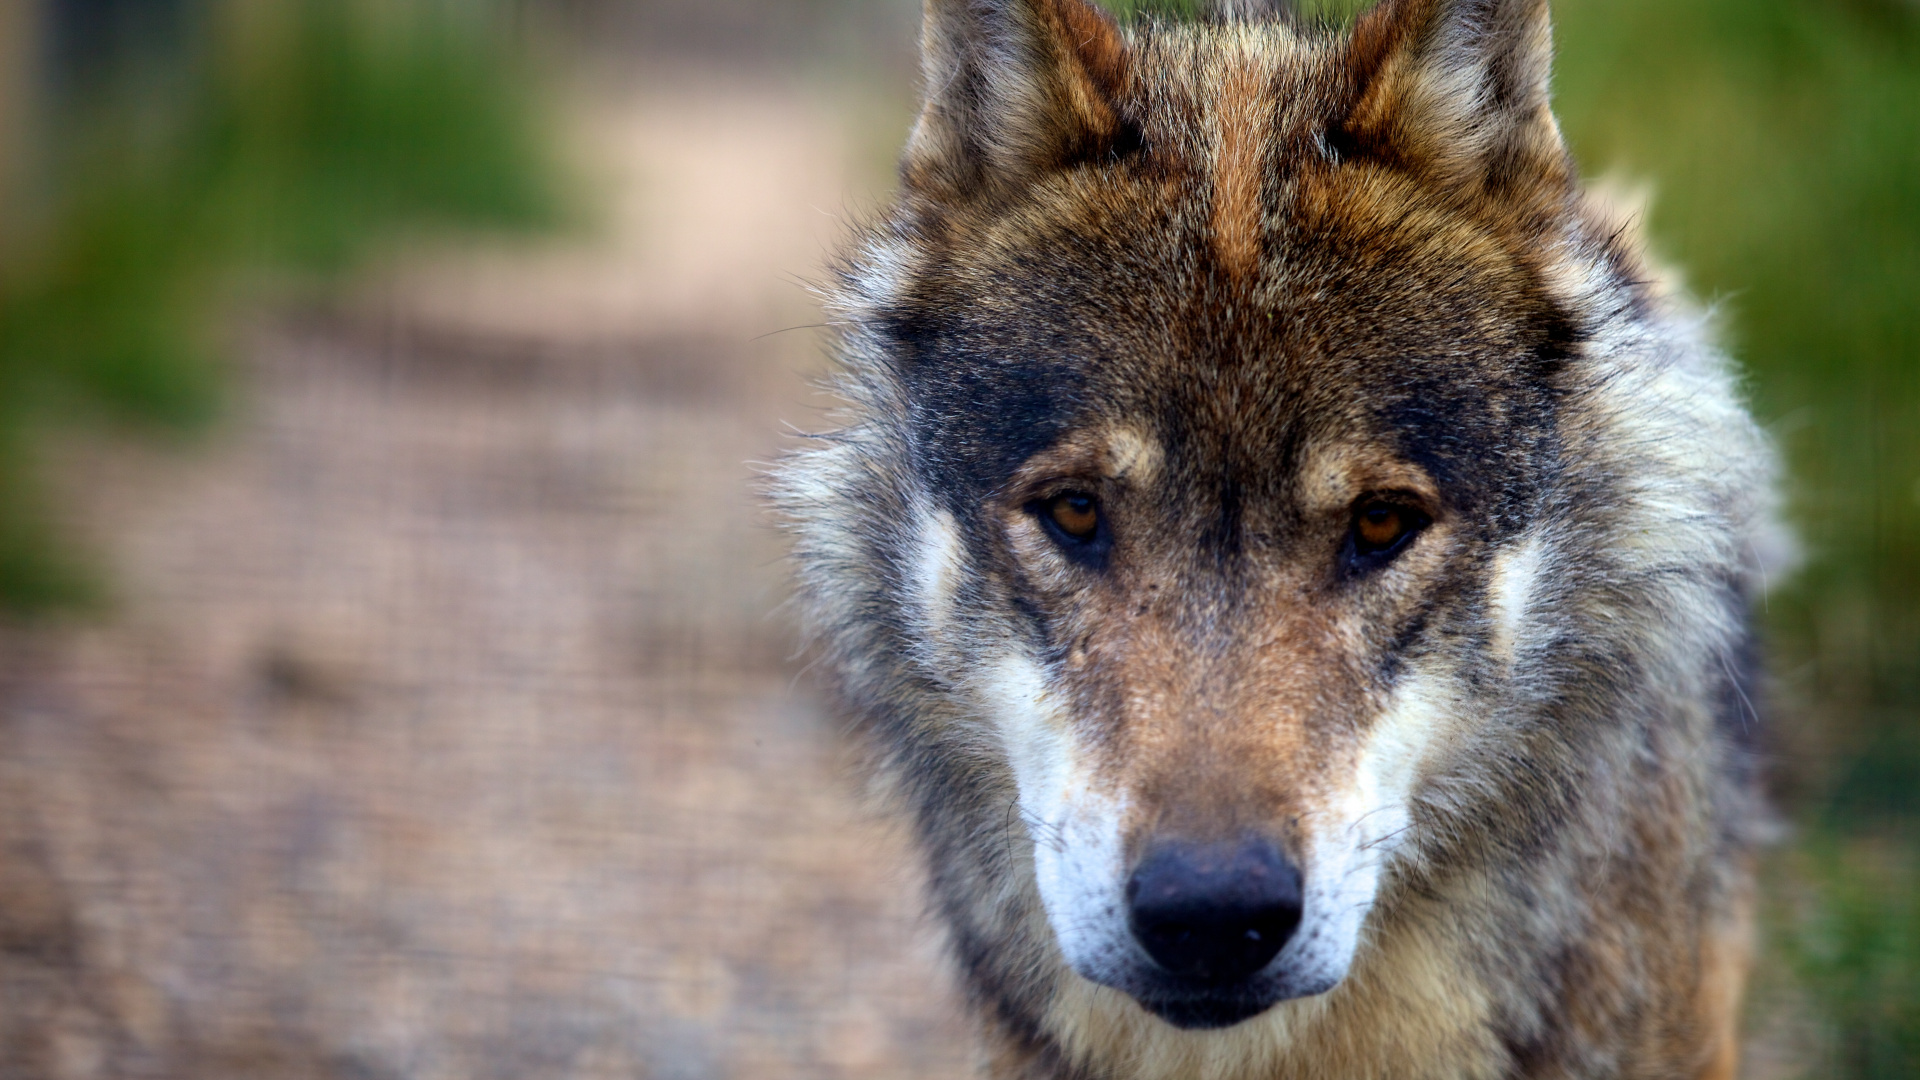 Brown and Black Wolf in Close up Photography. Wallpaper in 1920x1080 Resolution